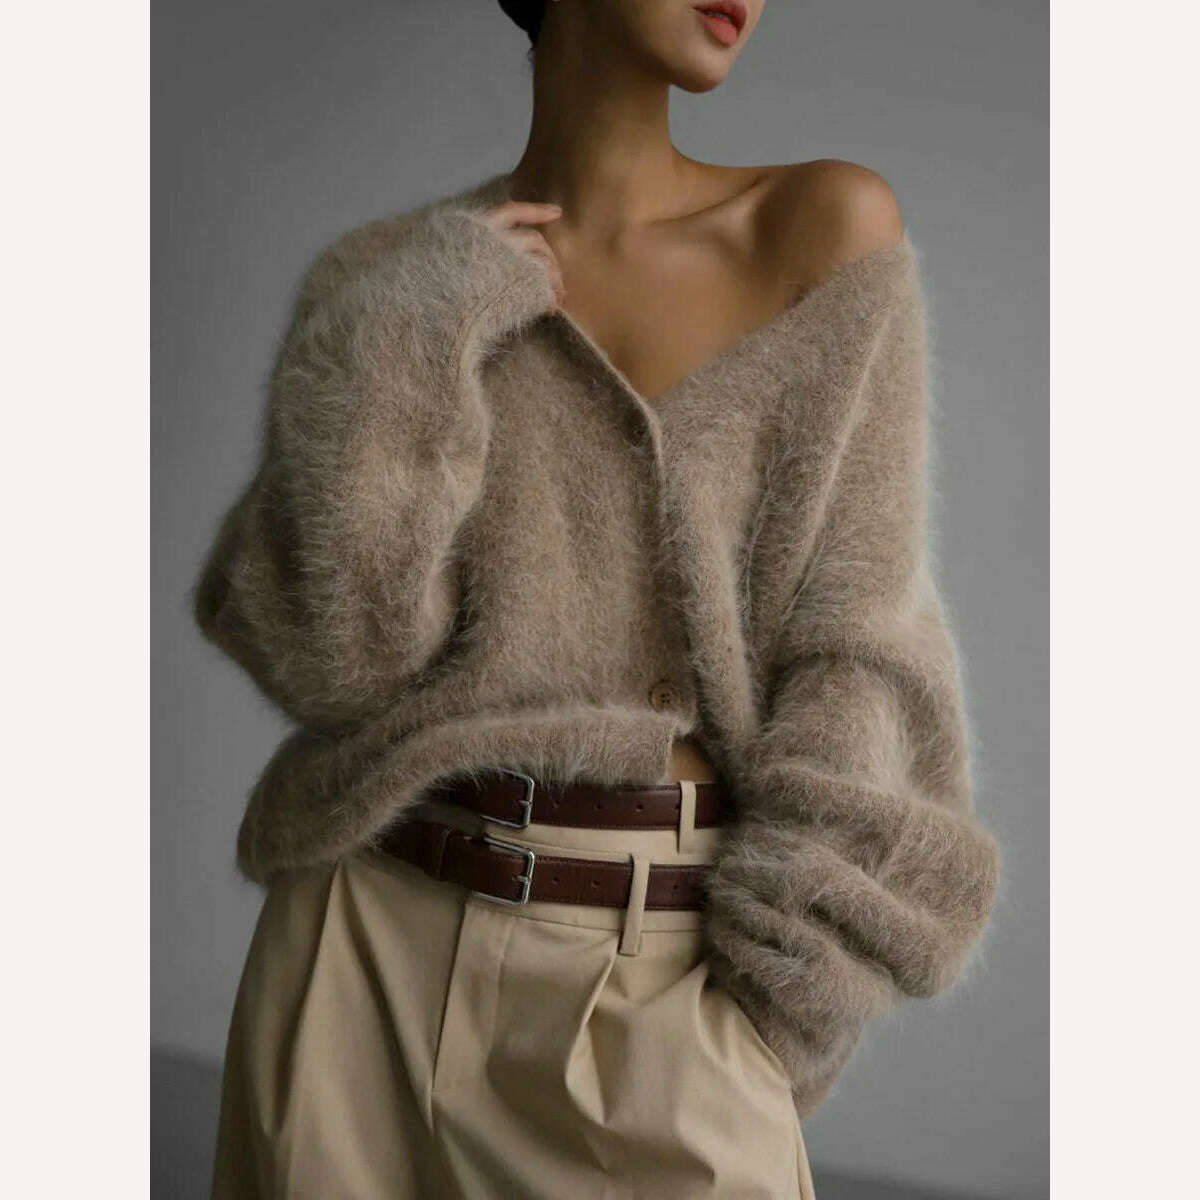 KIMLUD, Fluffy Mohair Cardigan For Women V-Neck Button Up Oversize Cardigan Sweater Autumn Winter Warm Knitted Outerwear, KIMLUD Women's Clothes